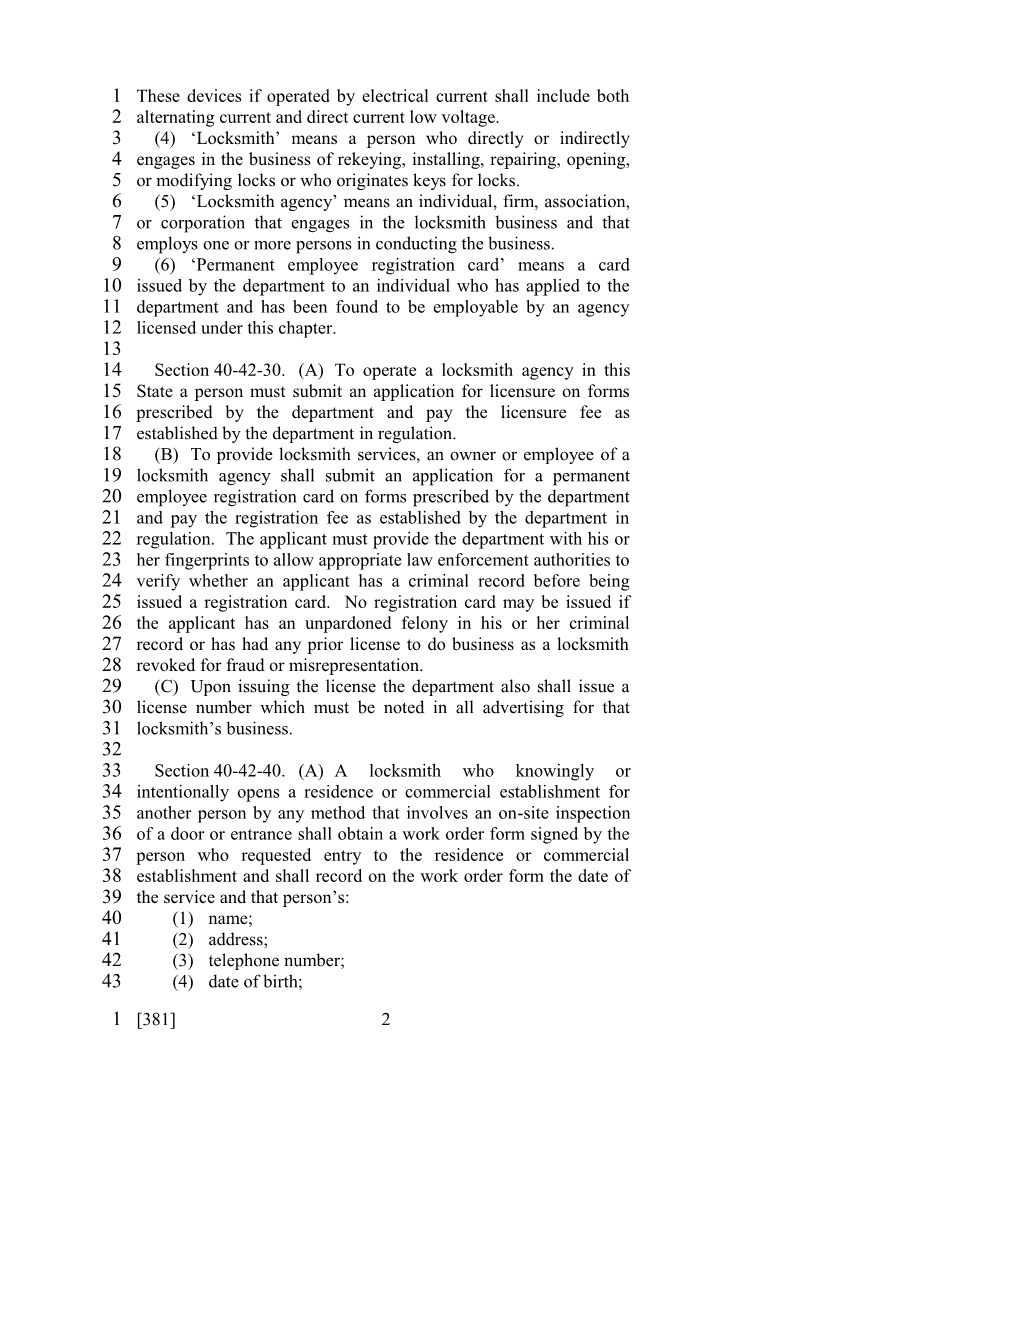 2001-2002 Bill 381: Locksmith Agencies, Licensure and Registration Of; Businesses And